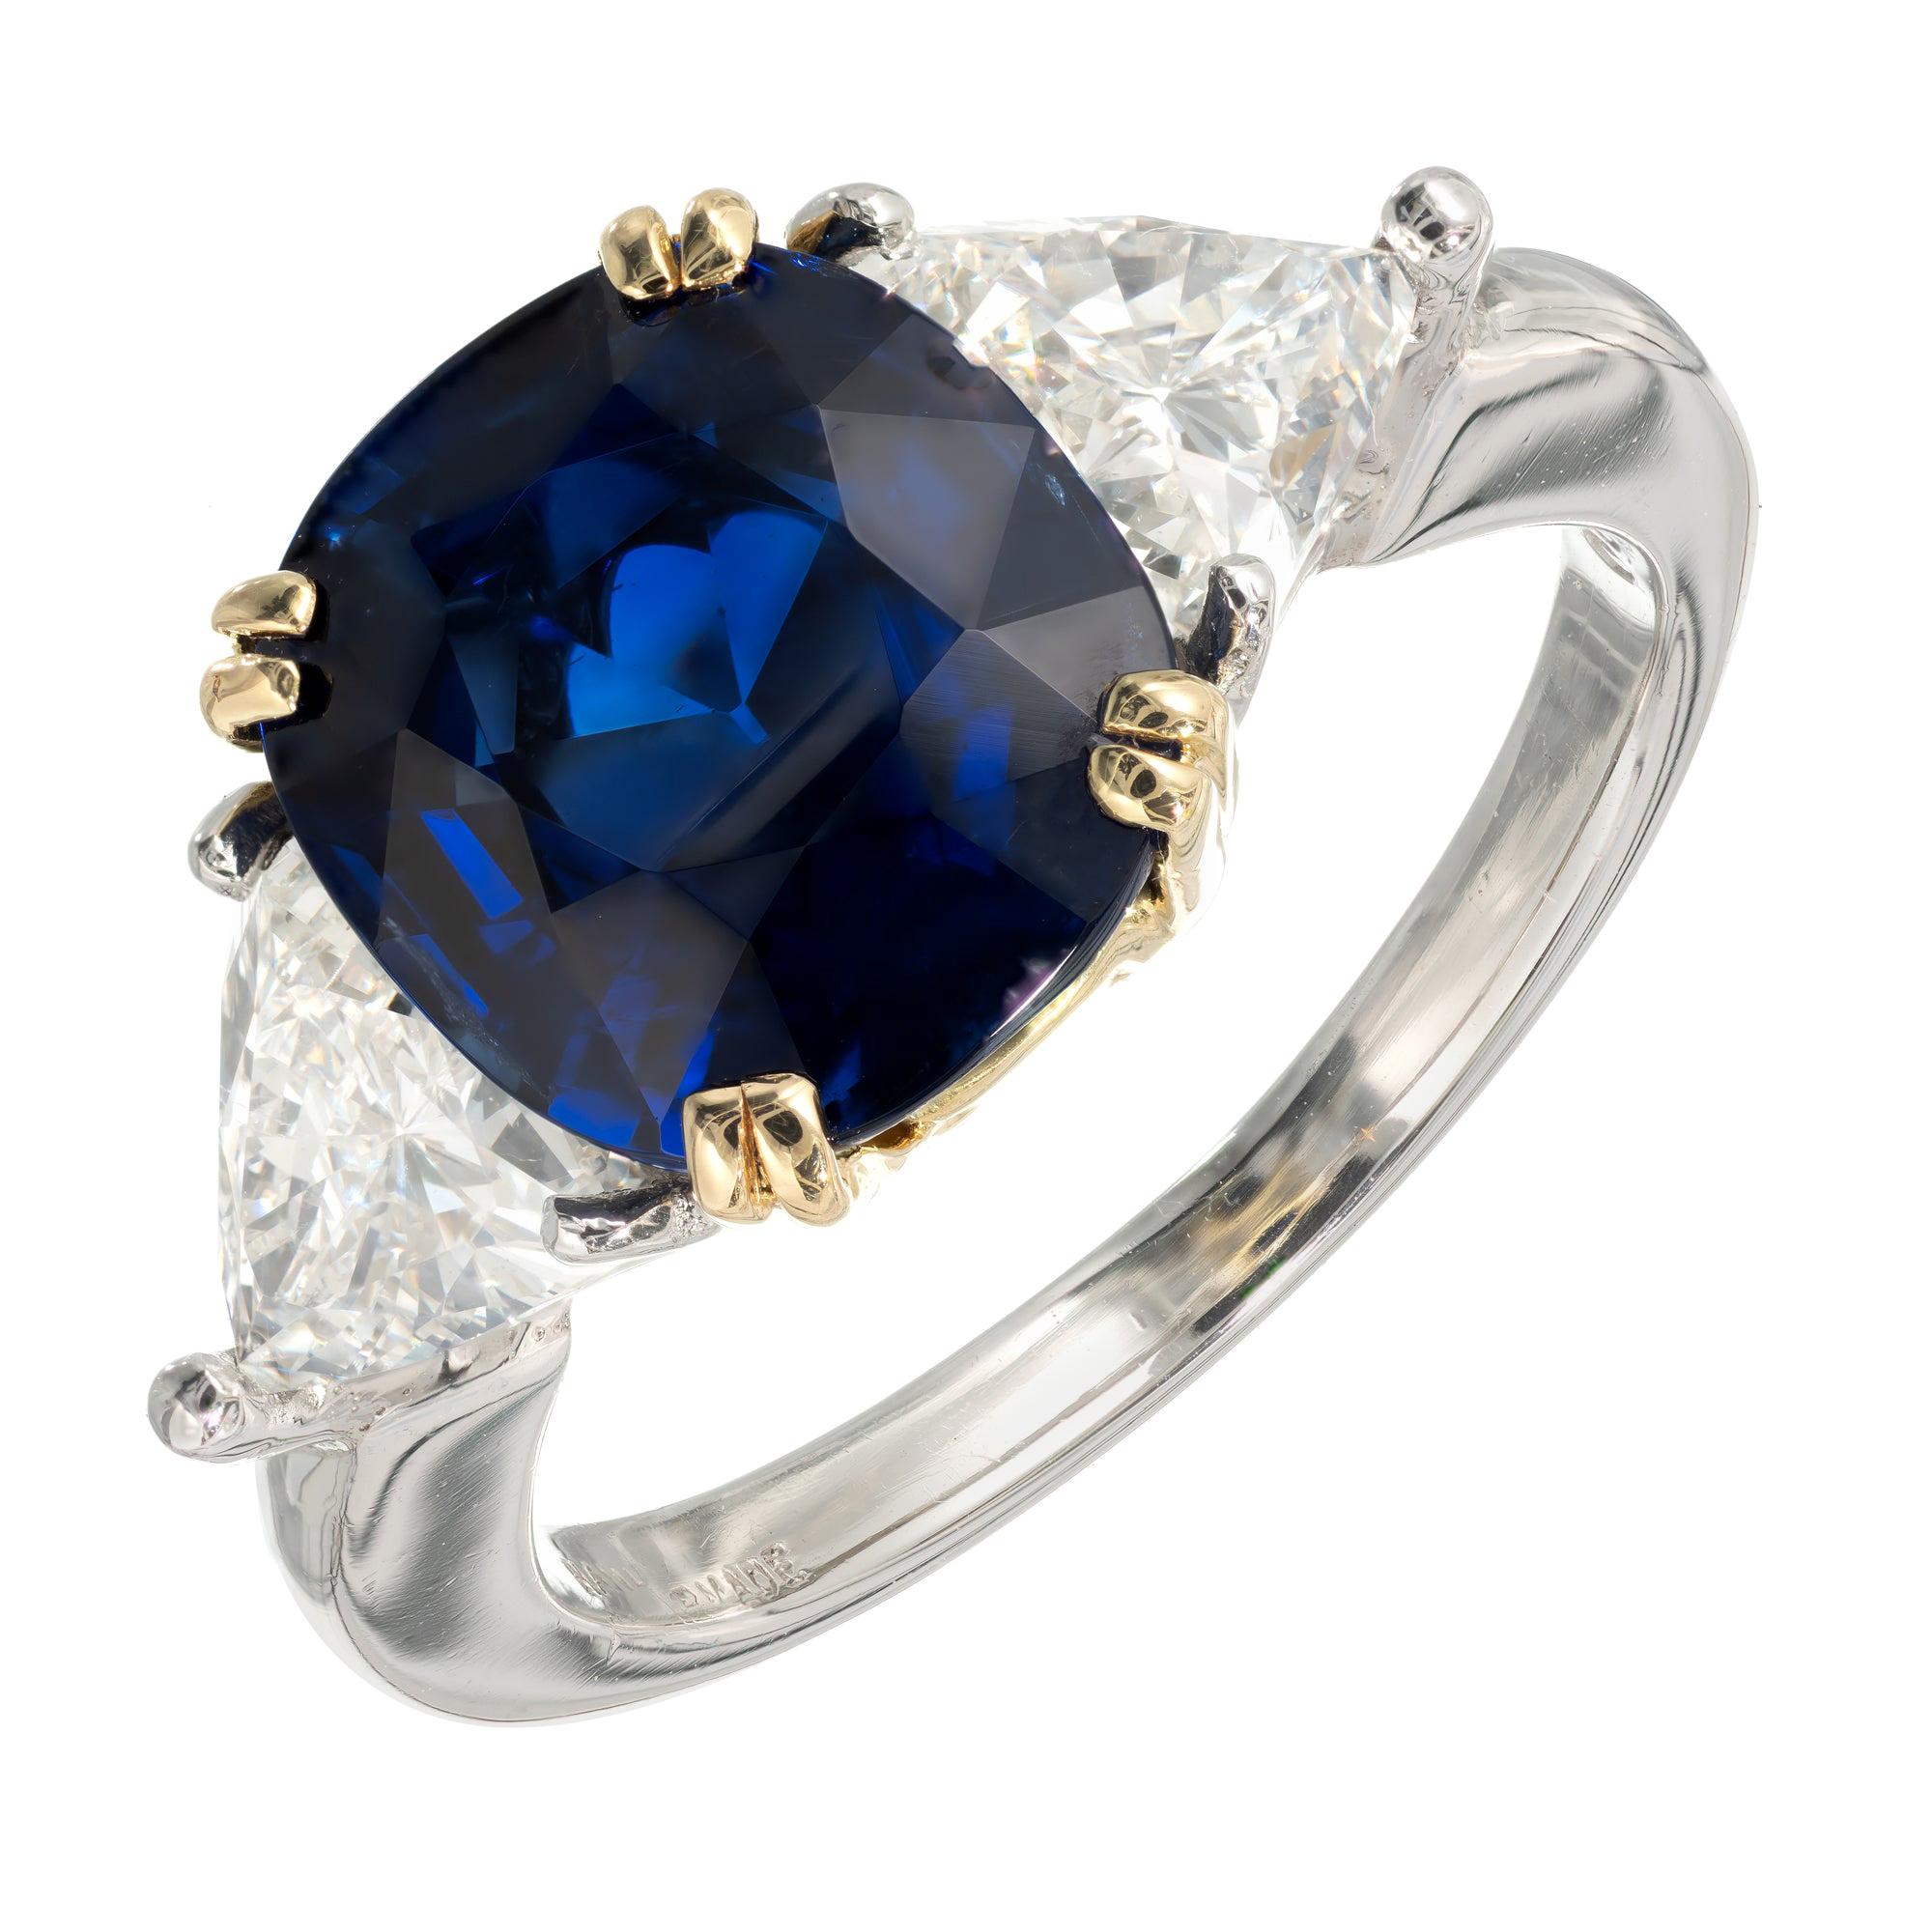 What does a blue sapphire engagement ring mean?